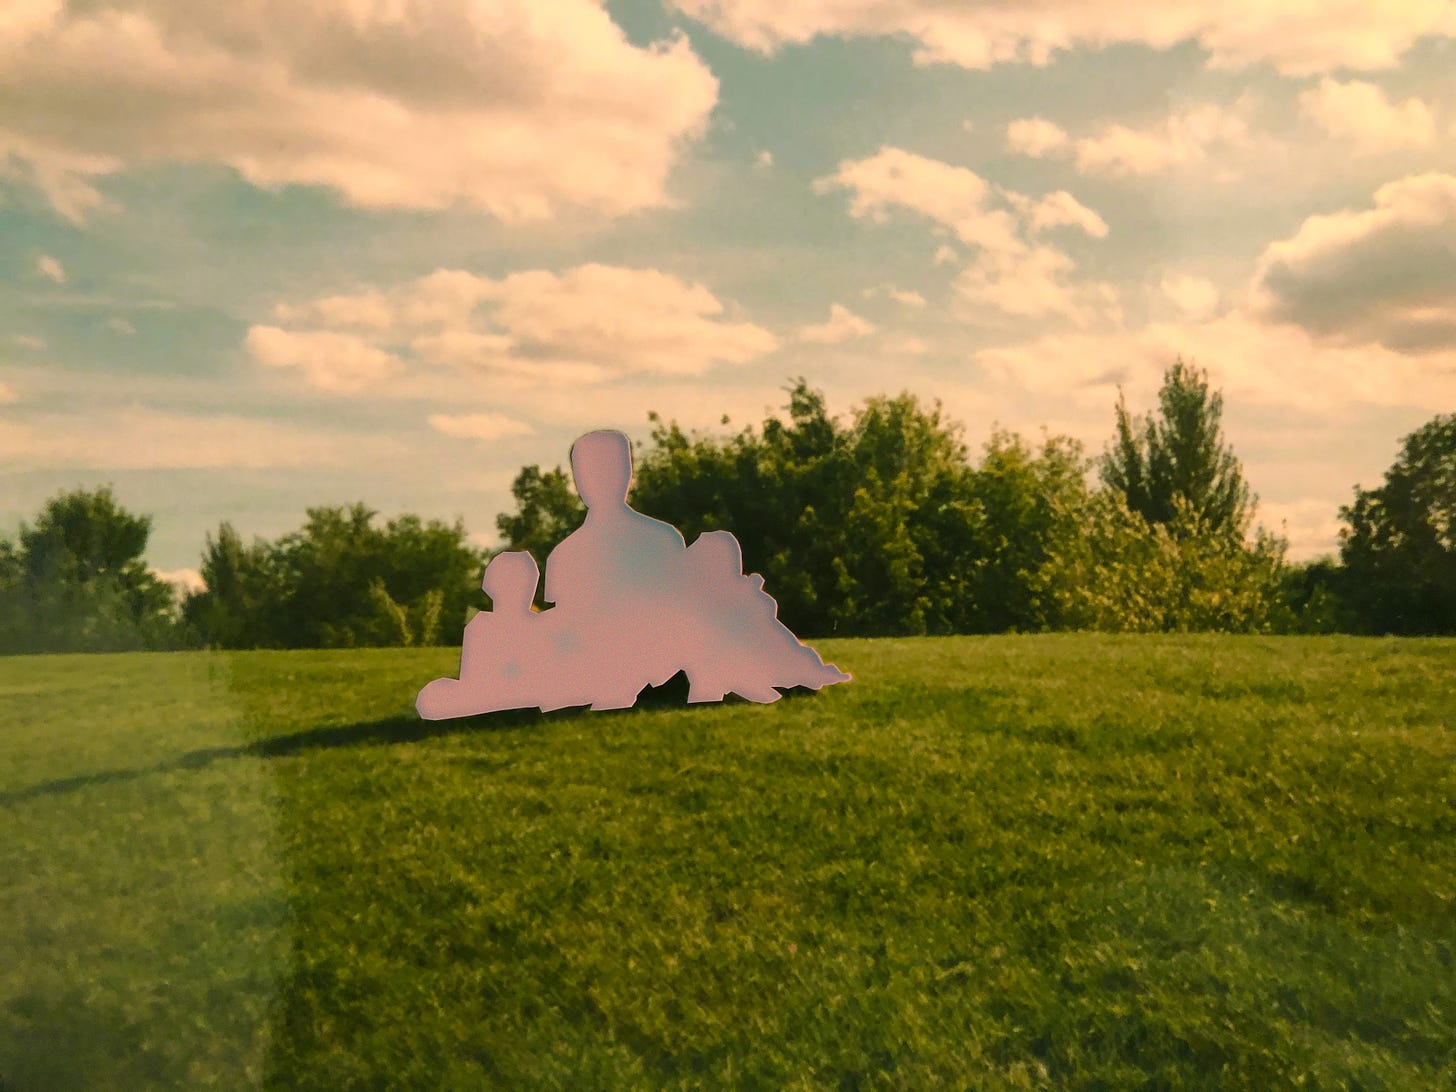 grassy field with blue skies and fluffy clouds. cut out silhouette of three people sitting together. 